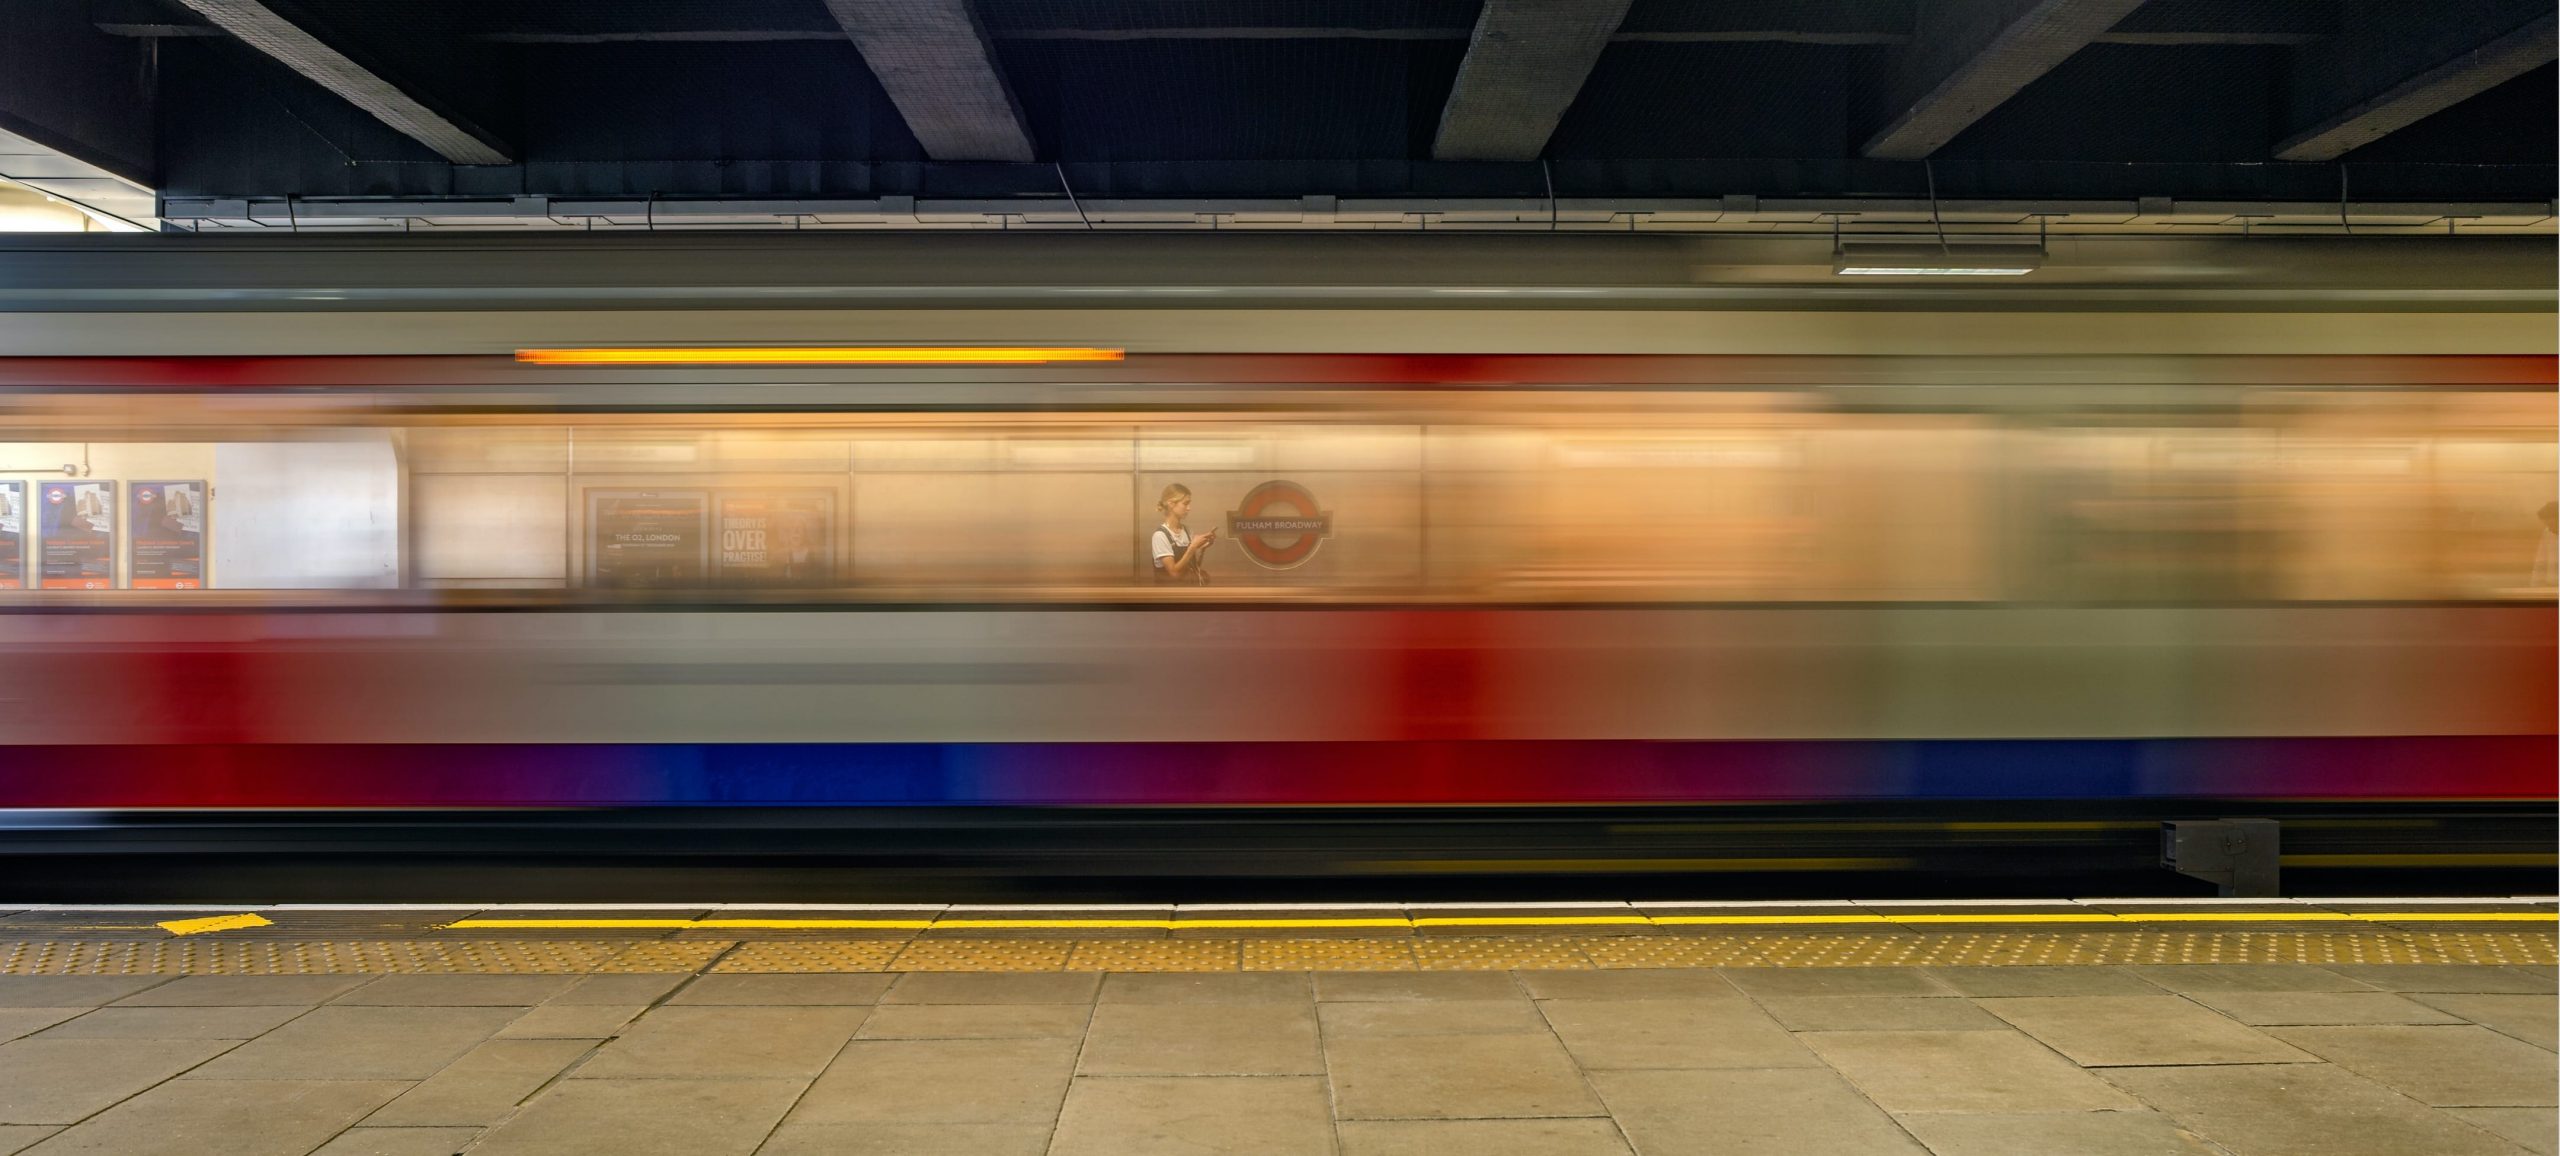 UBS student housing, long exposure image of train going through a tube station